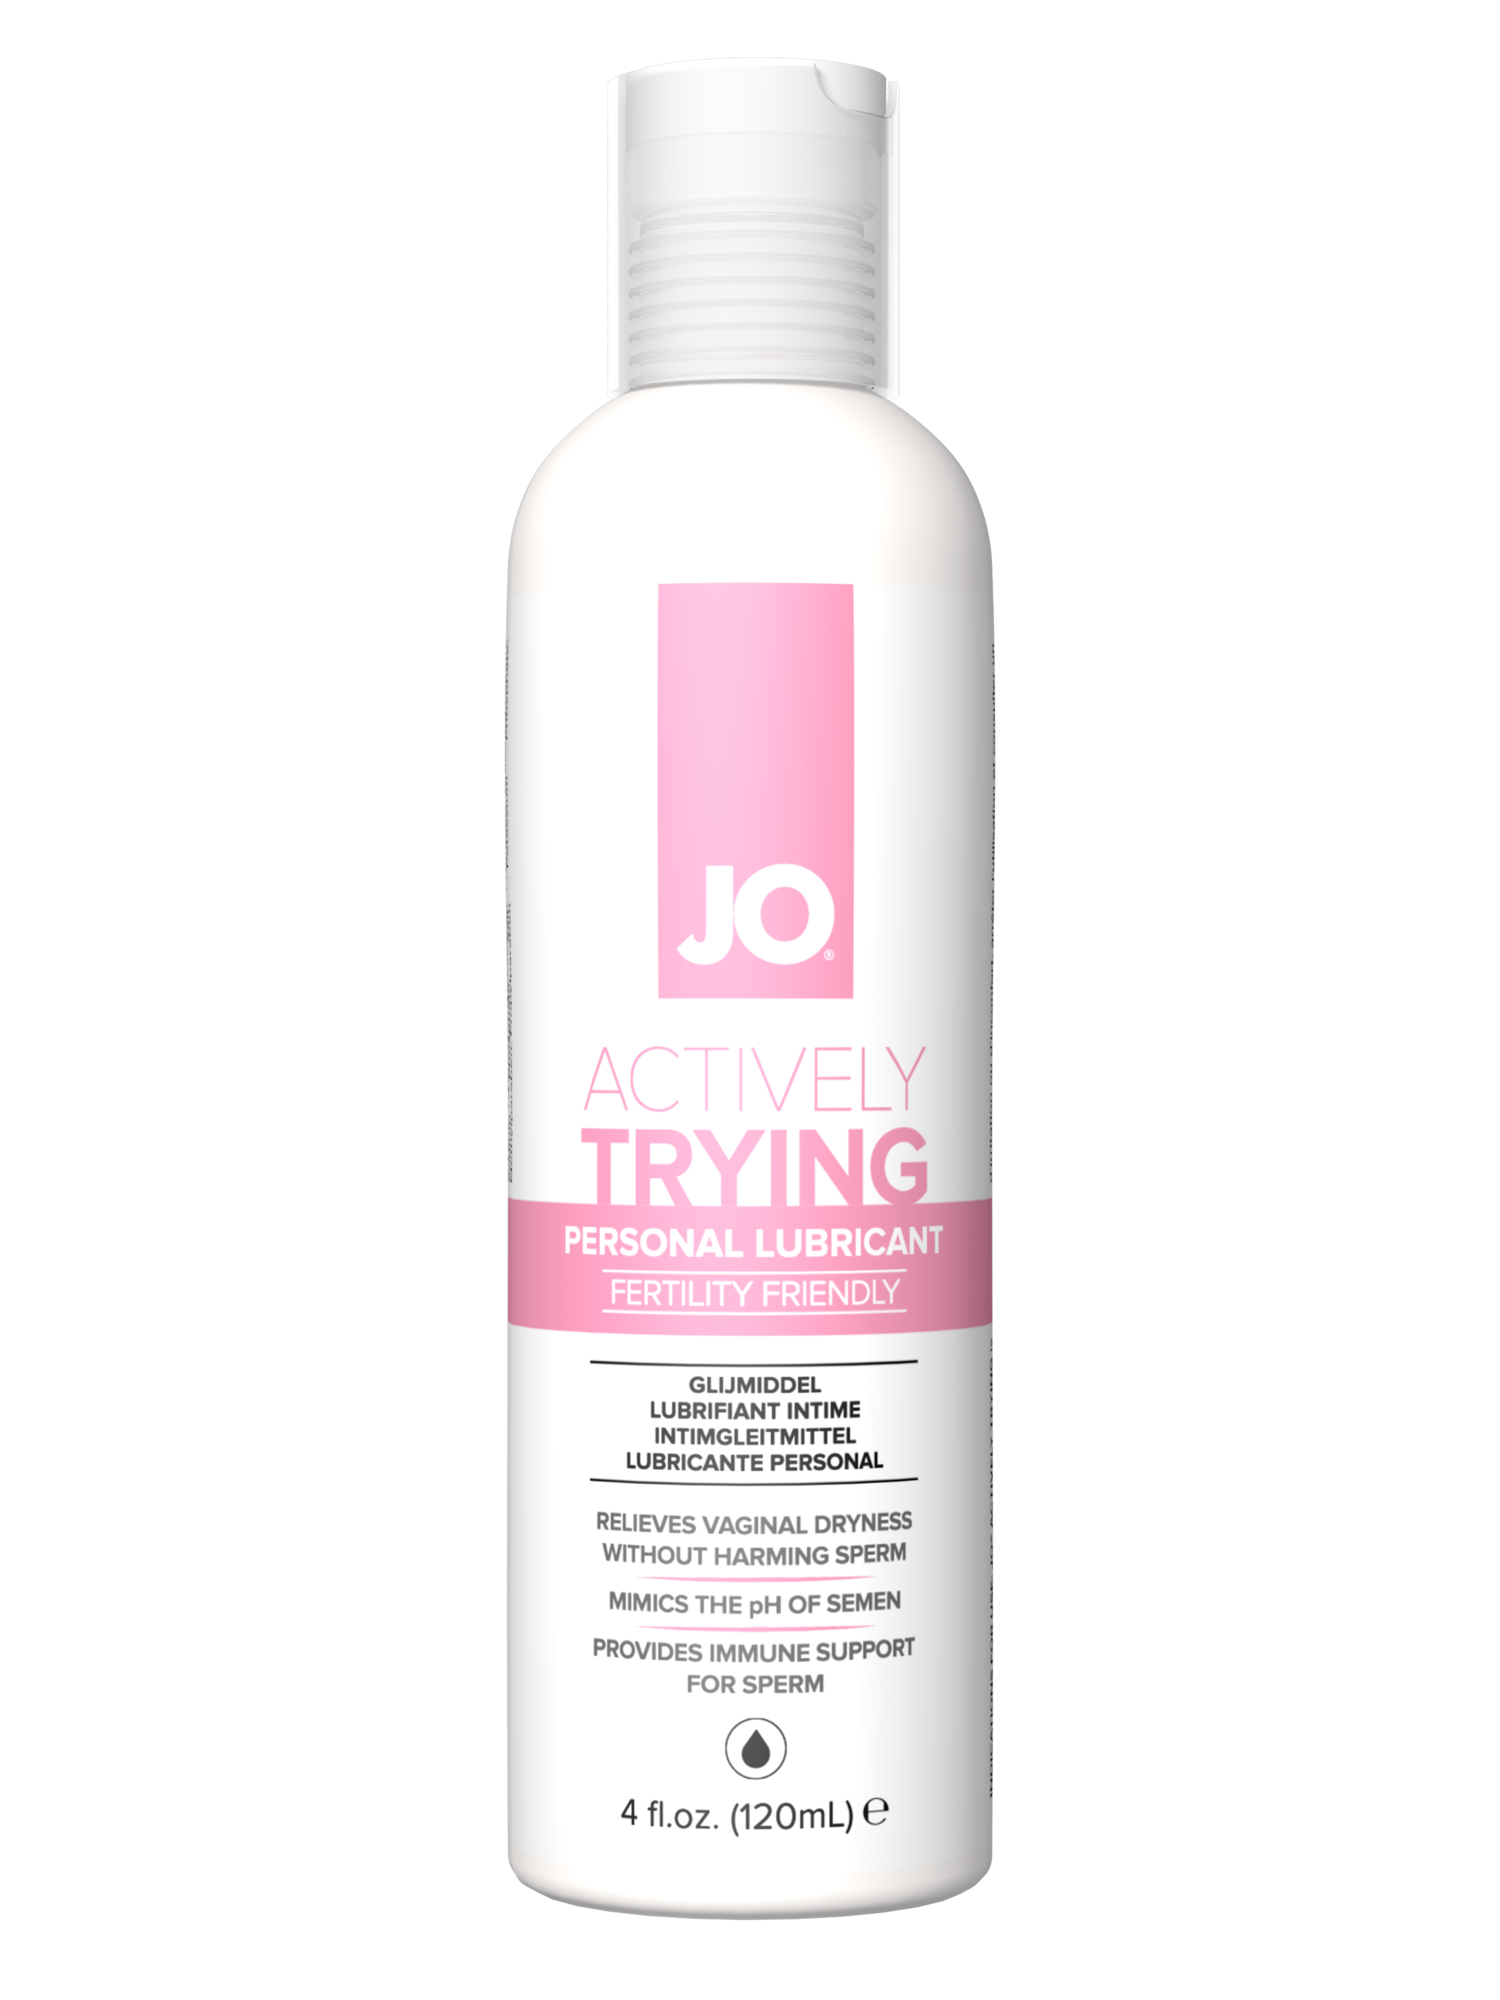 JO® ACTIVELY TRYING lubricant creates a healthy environment for sperm with ...